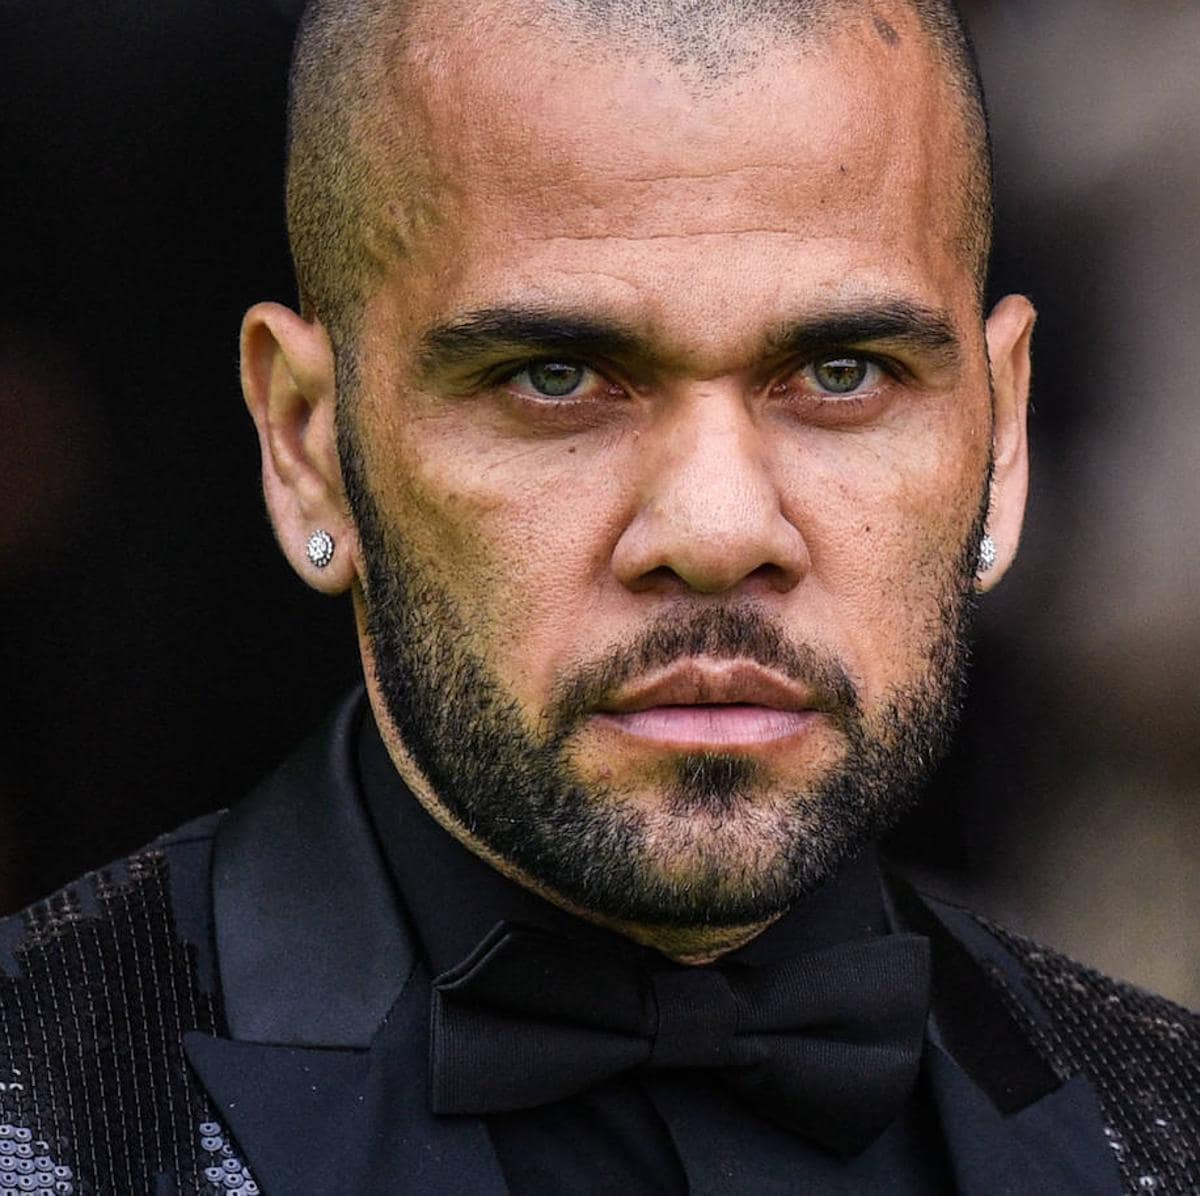 Alves changes his version and admits that he penetrated the victim with consent